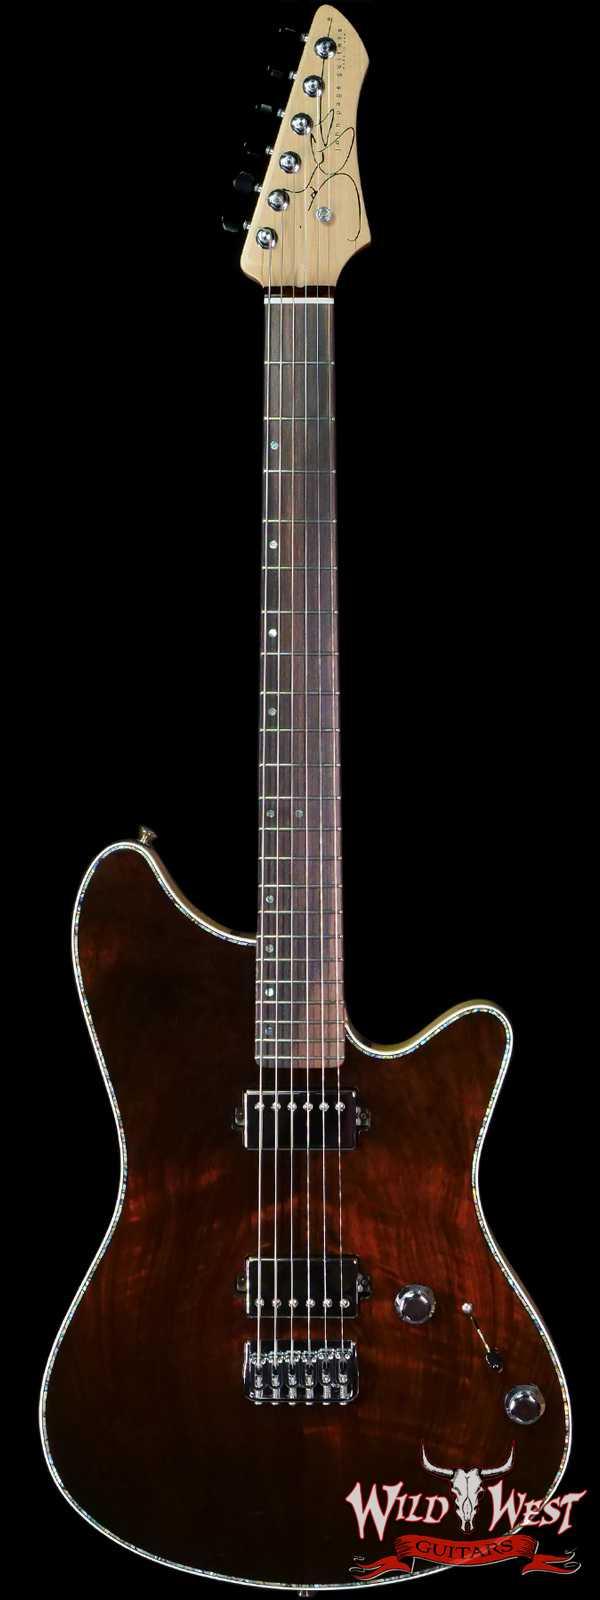 John Page Guitars Custom DL Brazilian Rosewood Top and Fingerboard Lollar Imperial Over-Wound Humbuckers 6.60 LBS